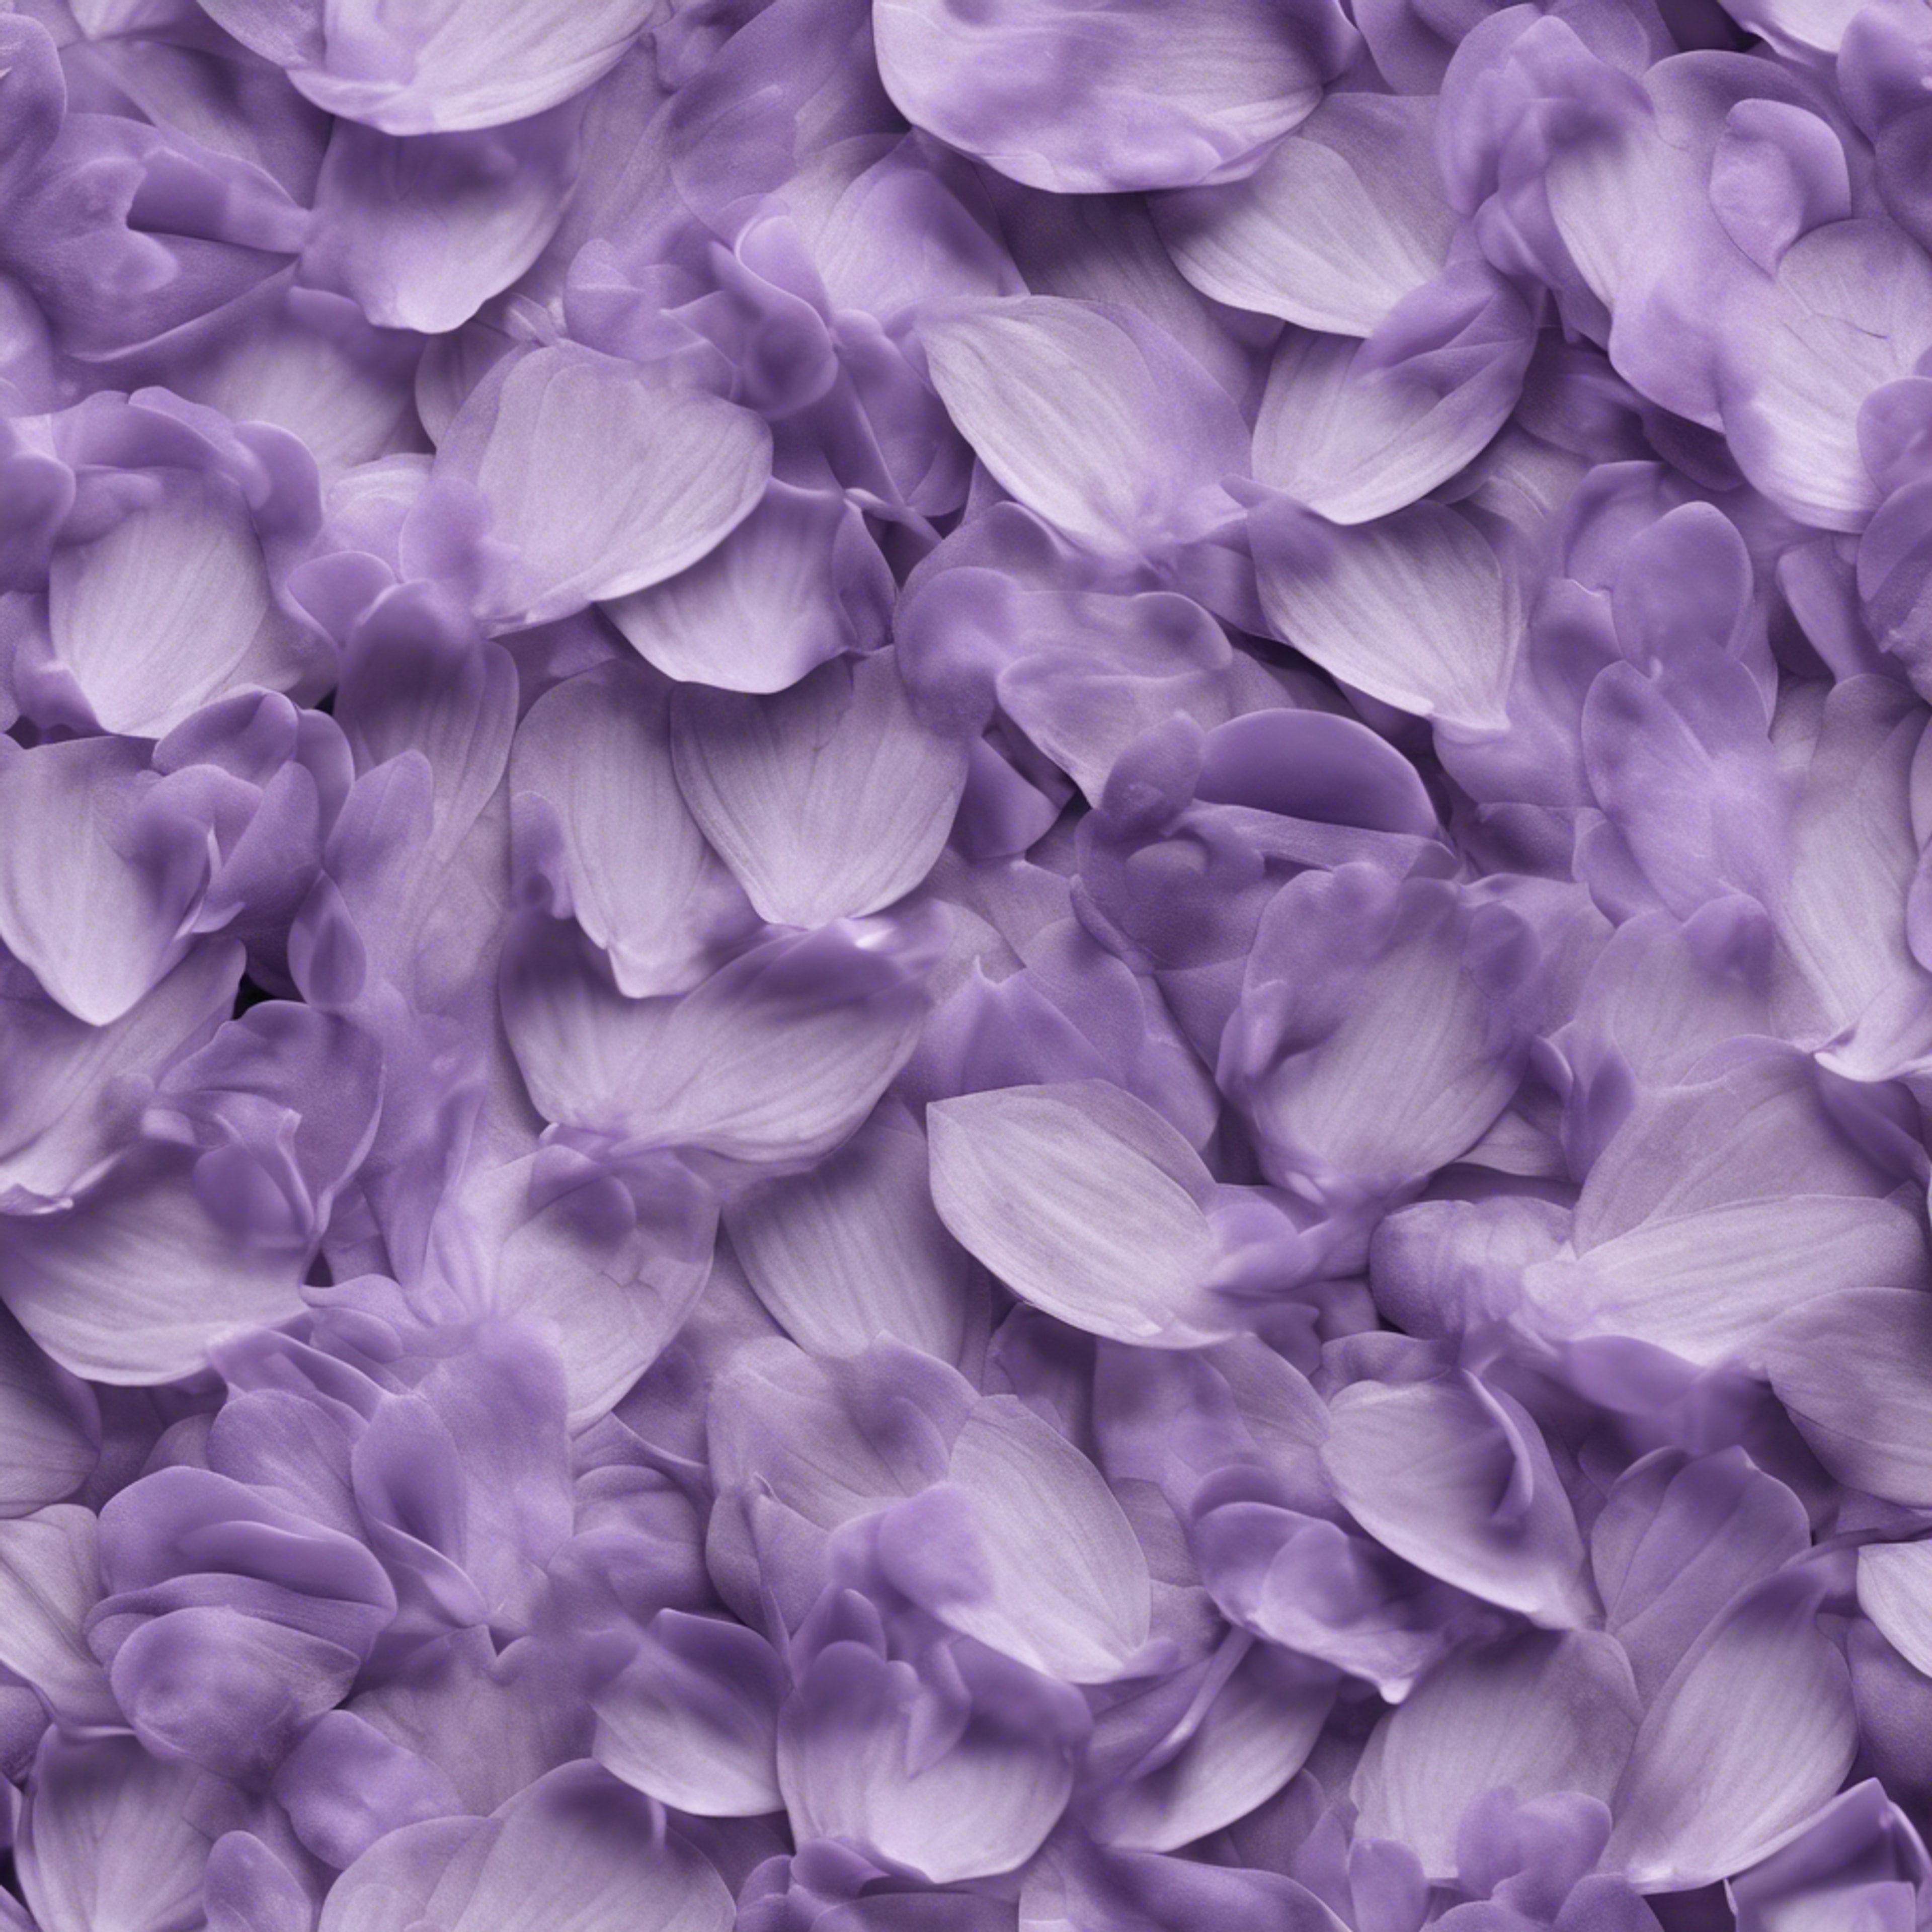 Seamless delicate pattern of layered lavender petals Wallpaper[df581ced6ed94056816b]